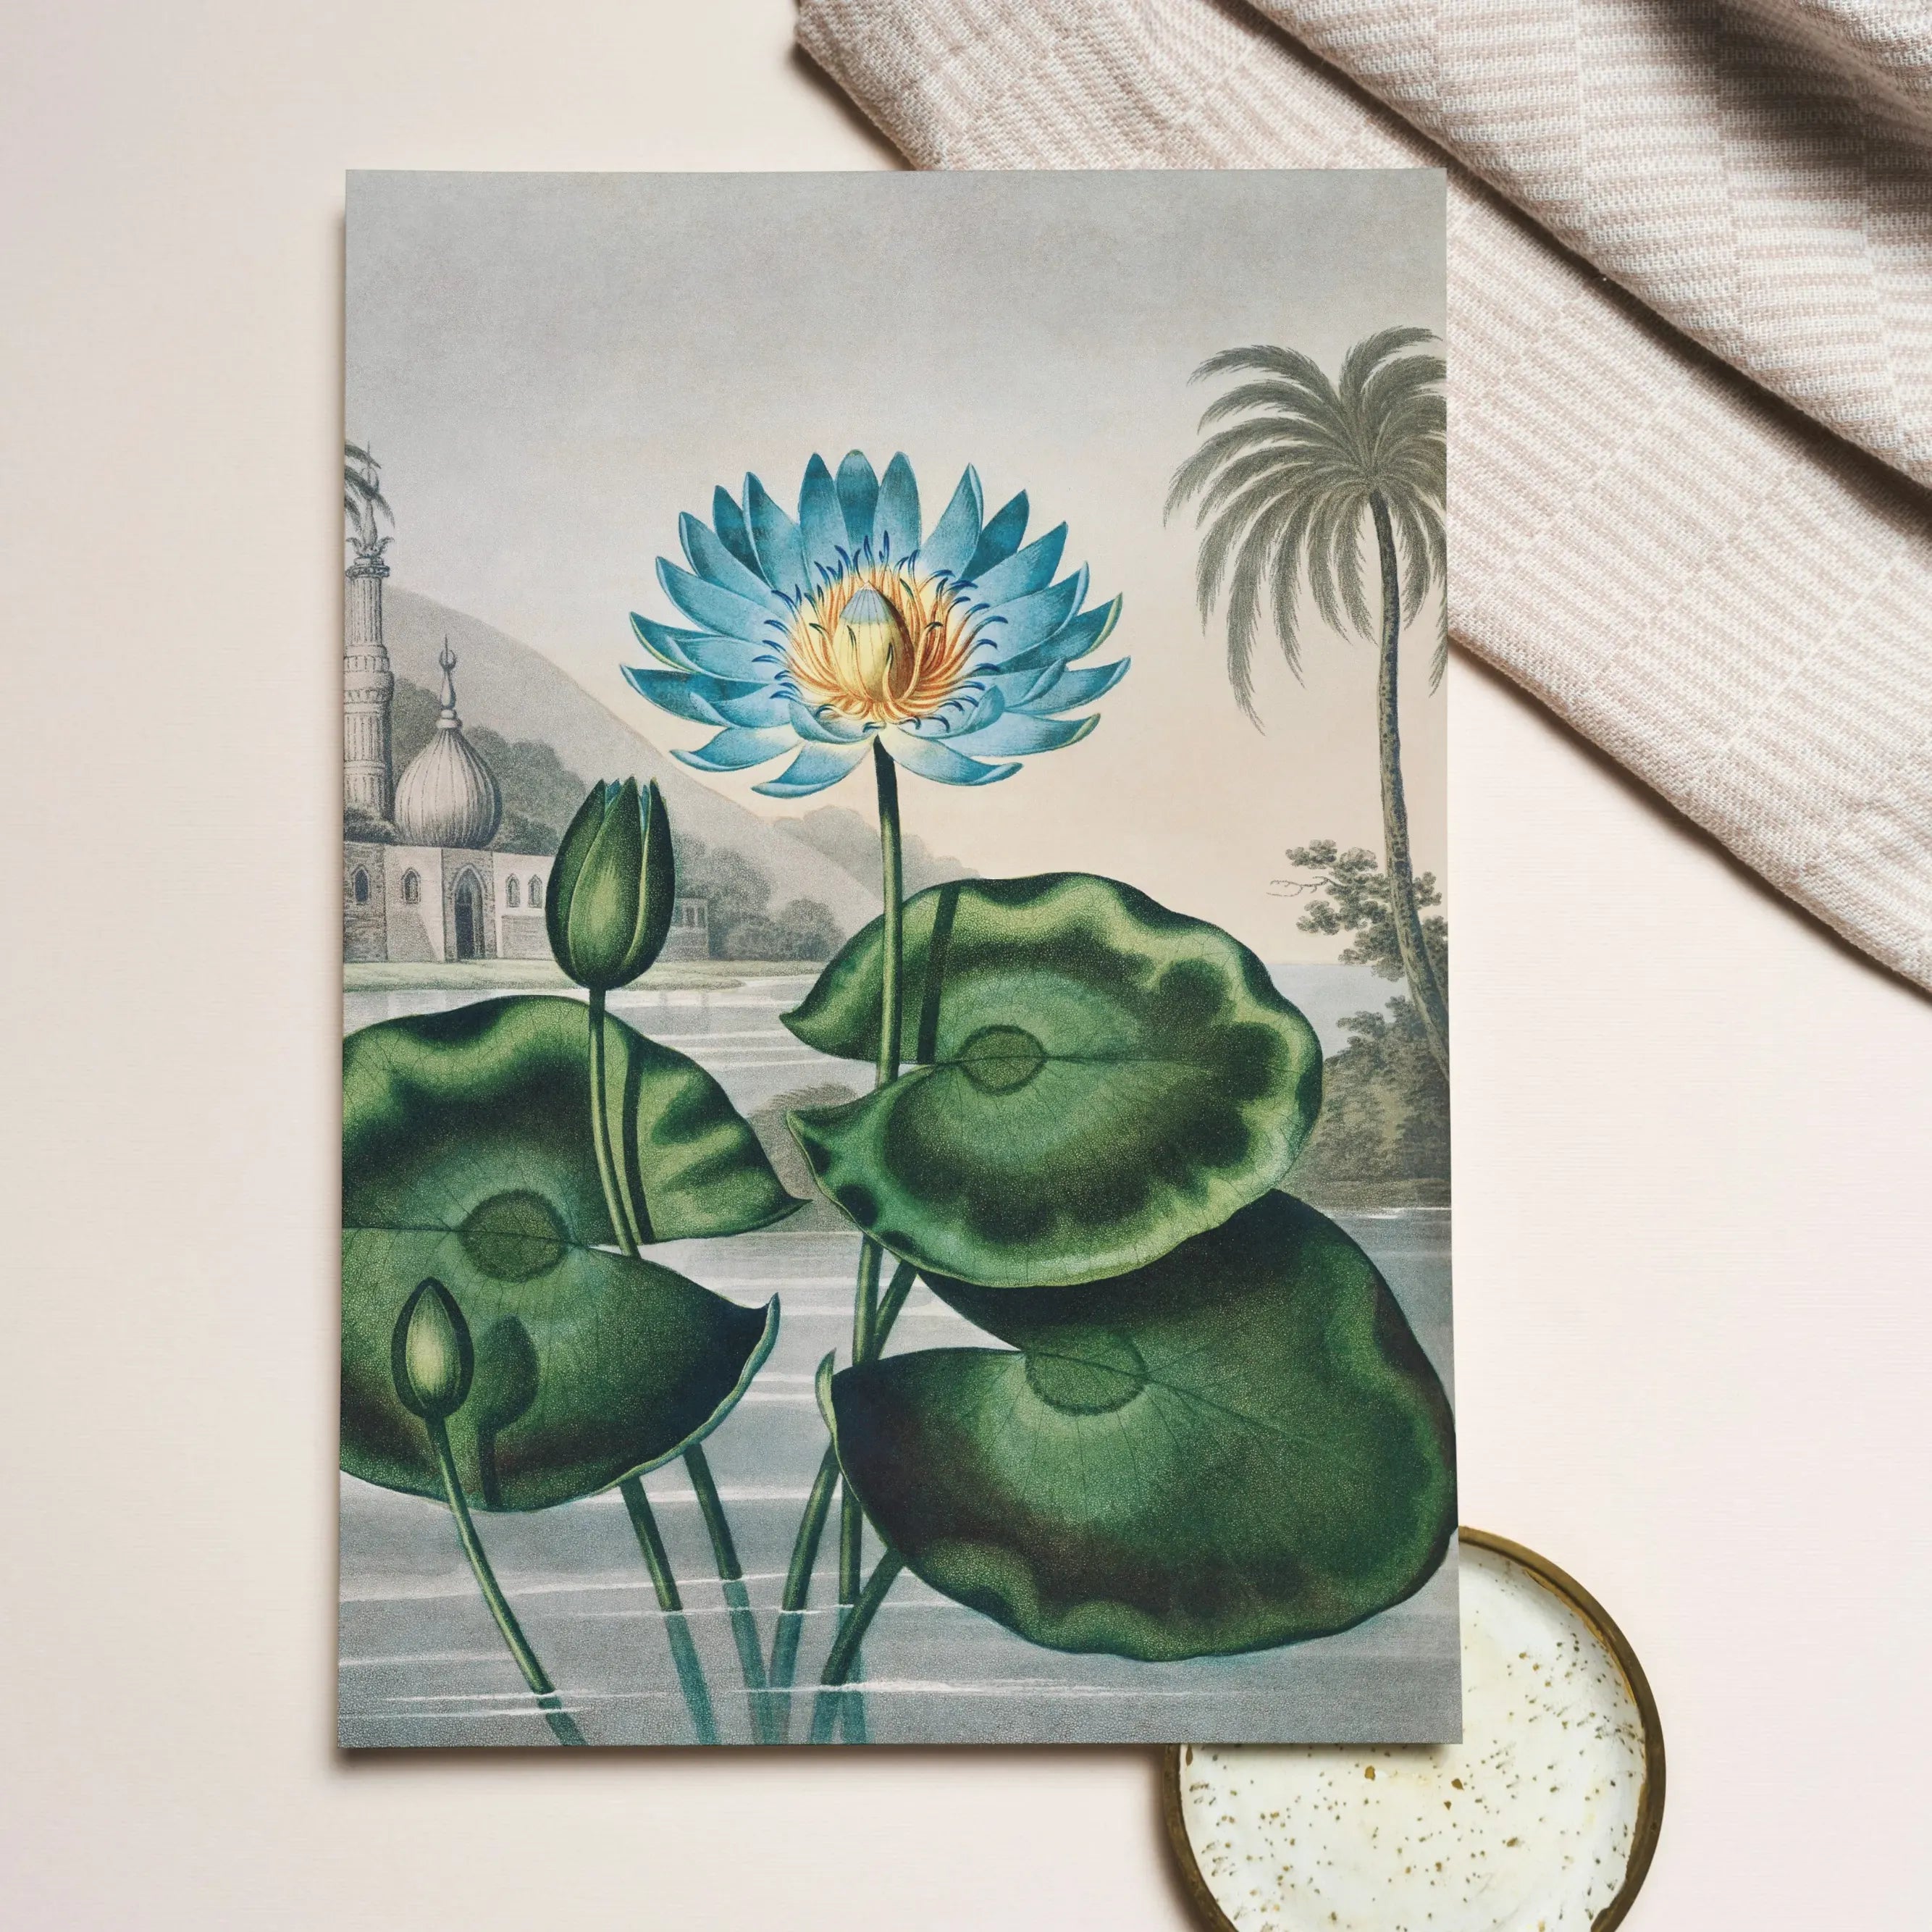 Blue Egyptian Water Lily - Robert John Thornton Greeting Card - A5 Portrait / 1 Card - Greeting & Note Cards